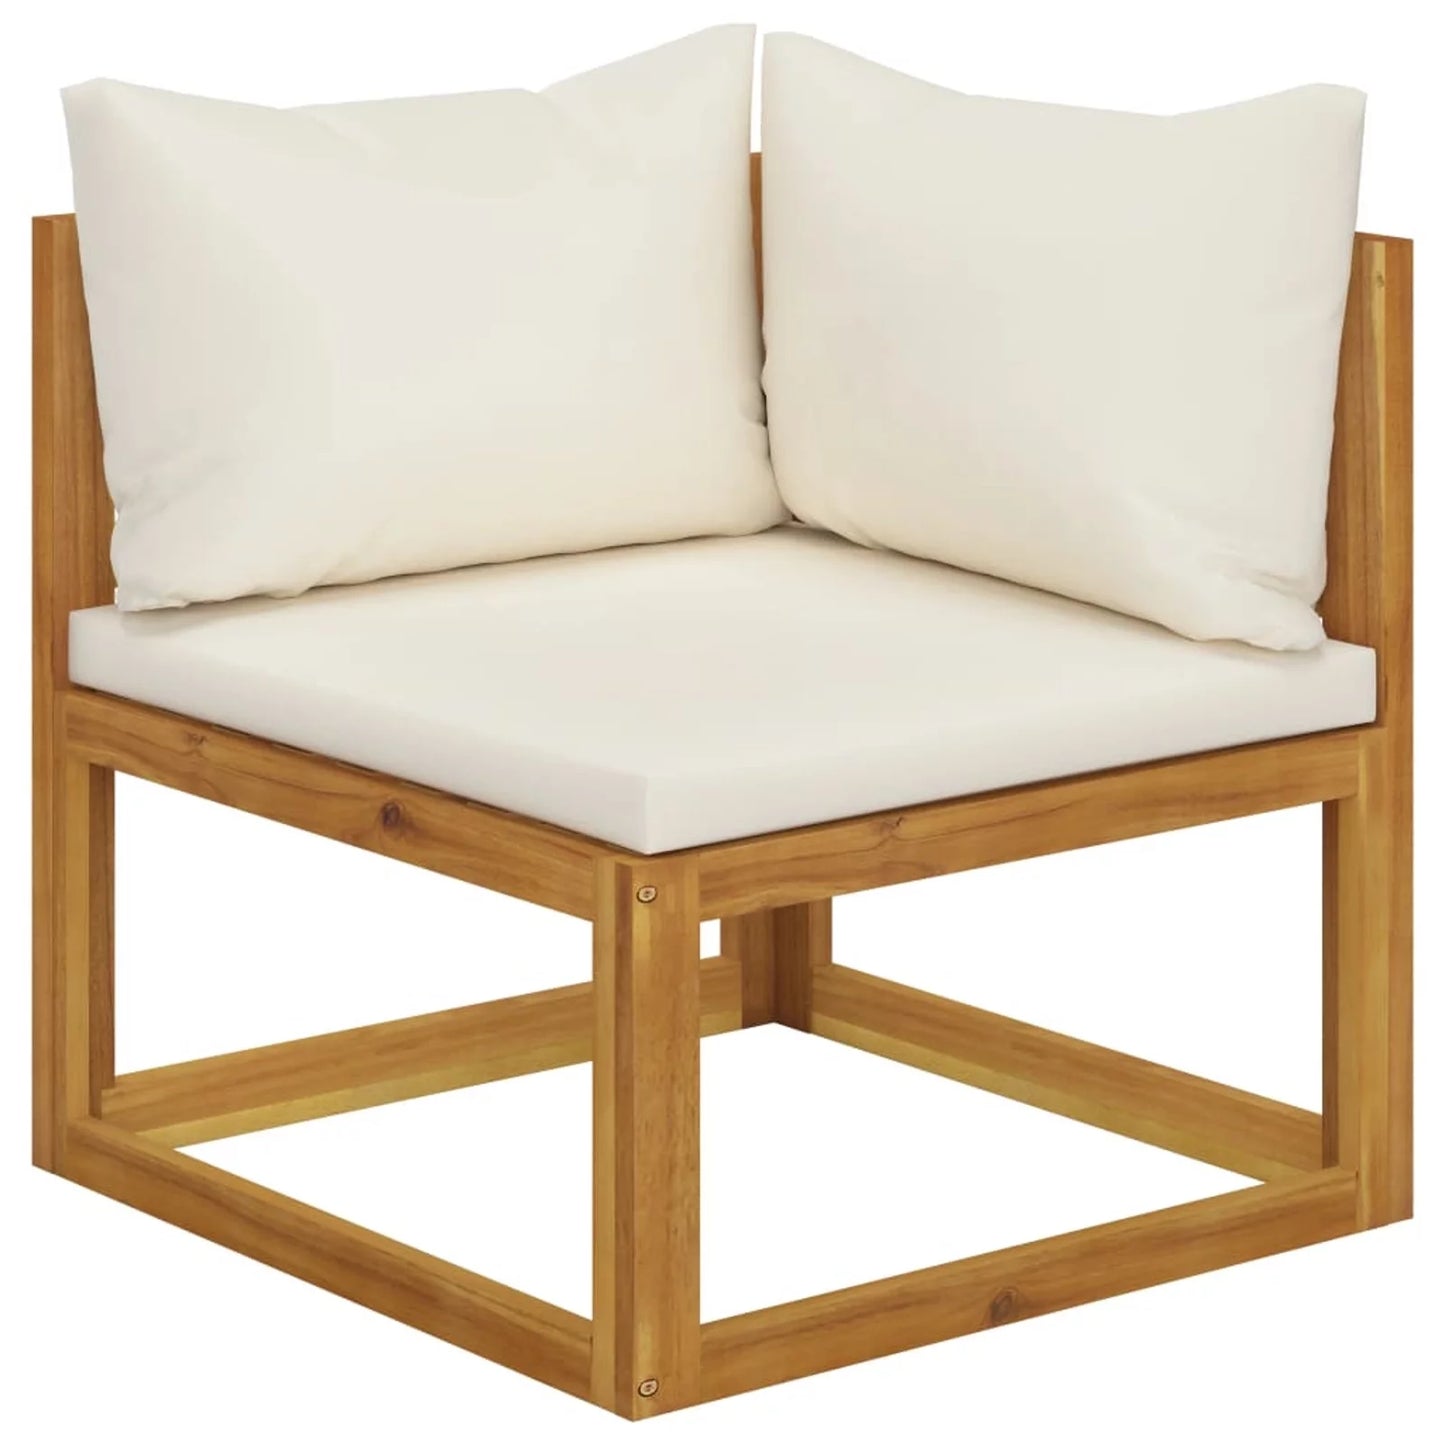 12 Piece Patio Set with Cushion Solid Acacia Wood